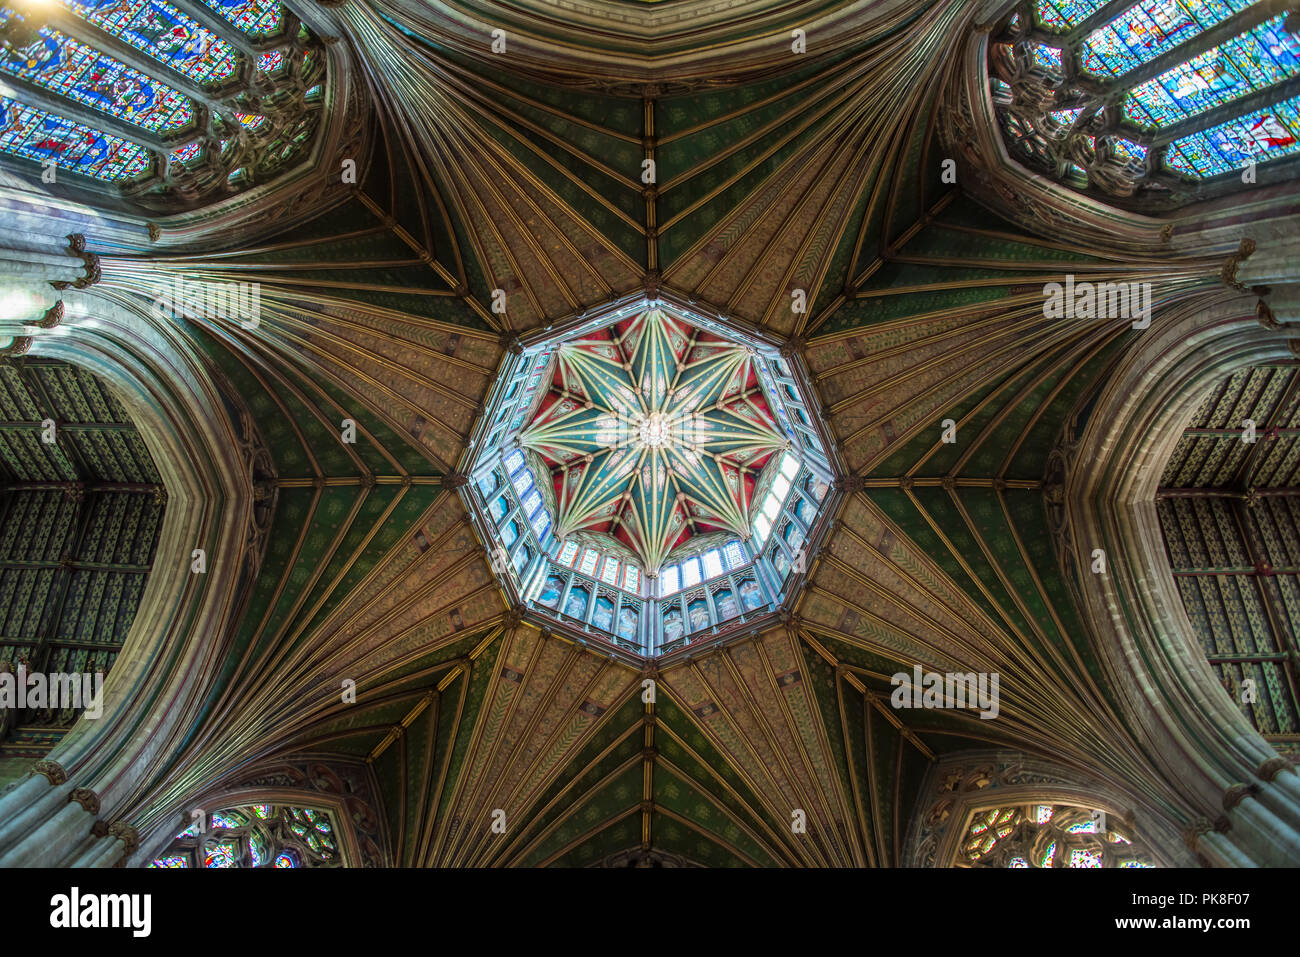 Octagon ceiling of Ely Cathedral Stock Photo